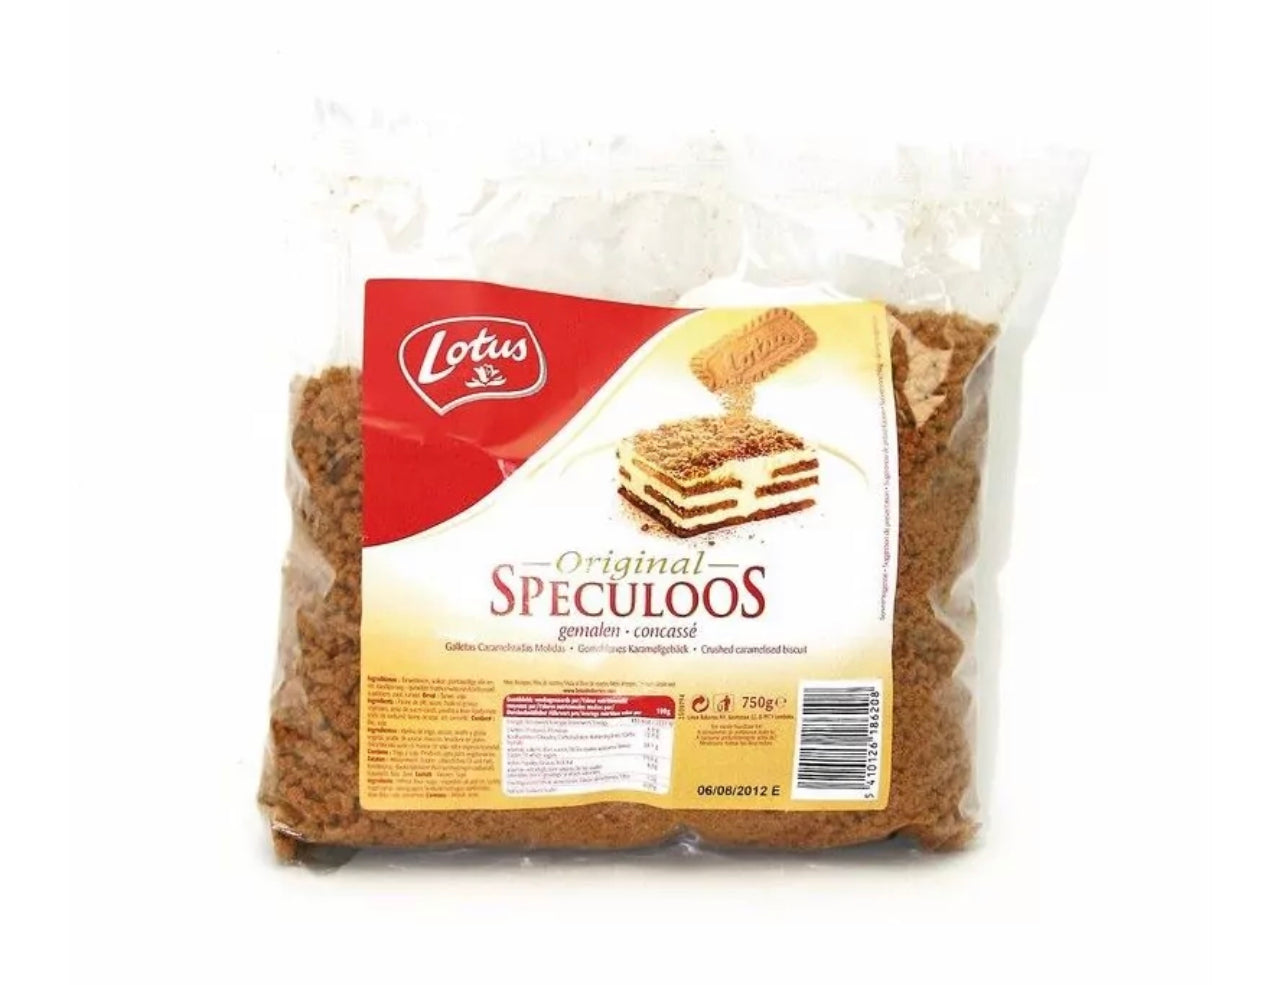 Crushed speculoos - 750g